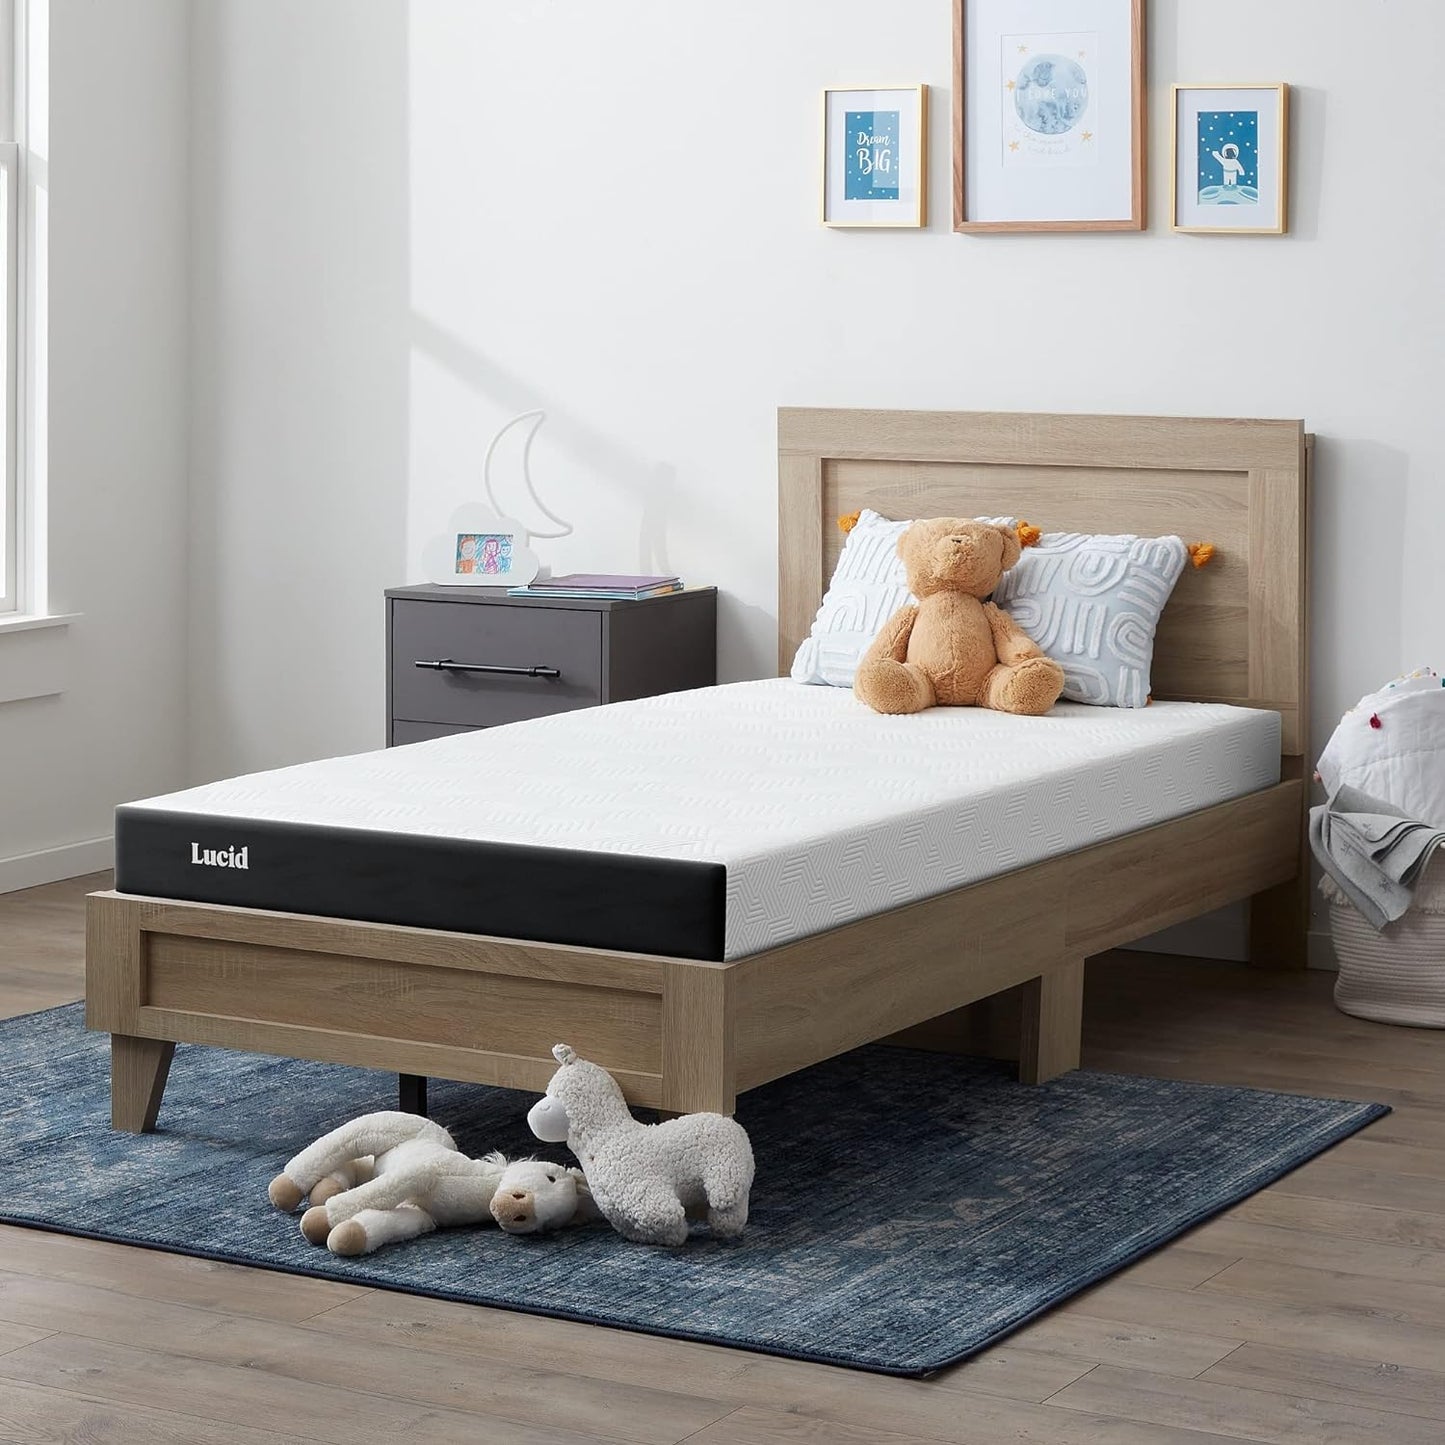 NEW - Lucid 5 Inch FULL Gel Memory Foam Mattress - Firm Feel - Gel Infusion - Memory Foam Infused with Bamboo Charcoal - Breathable Cover - Retail $152